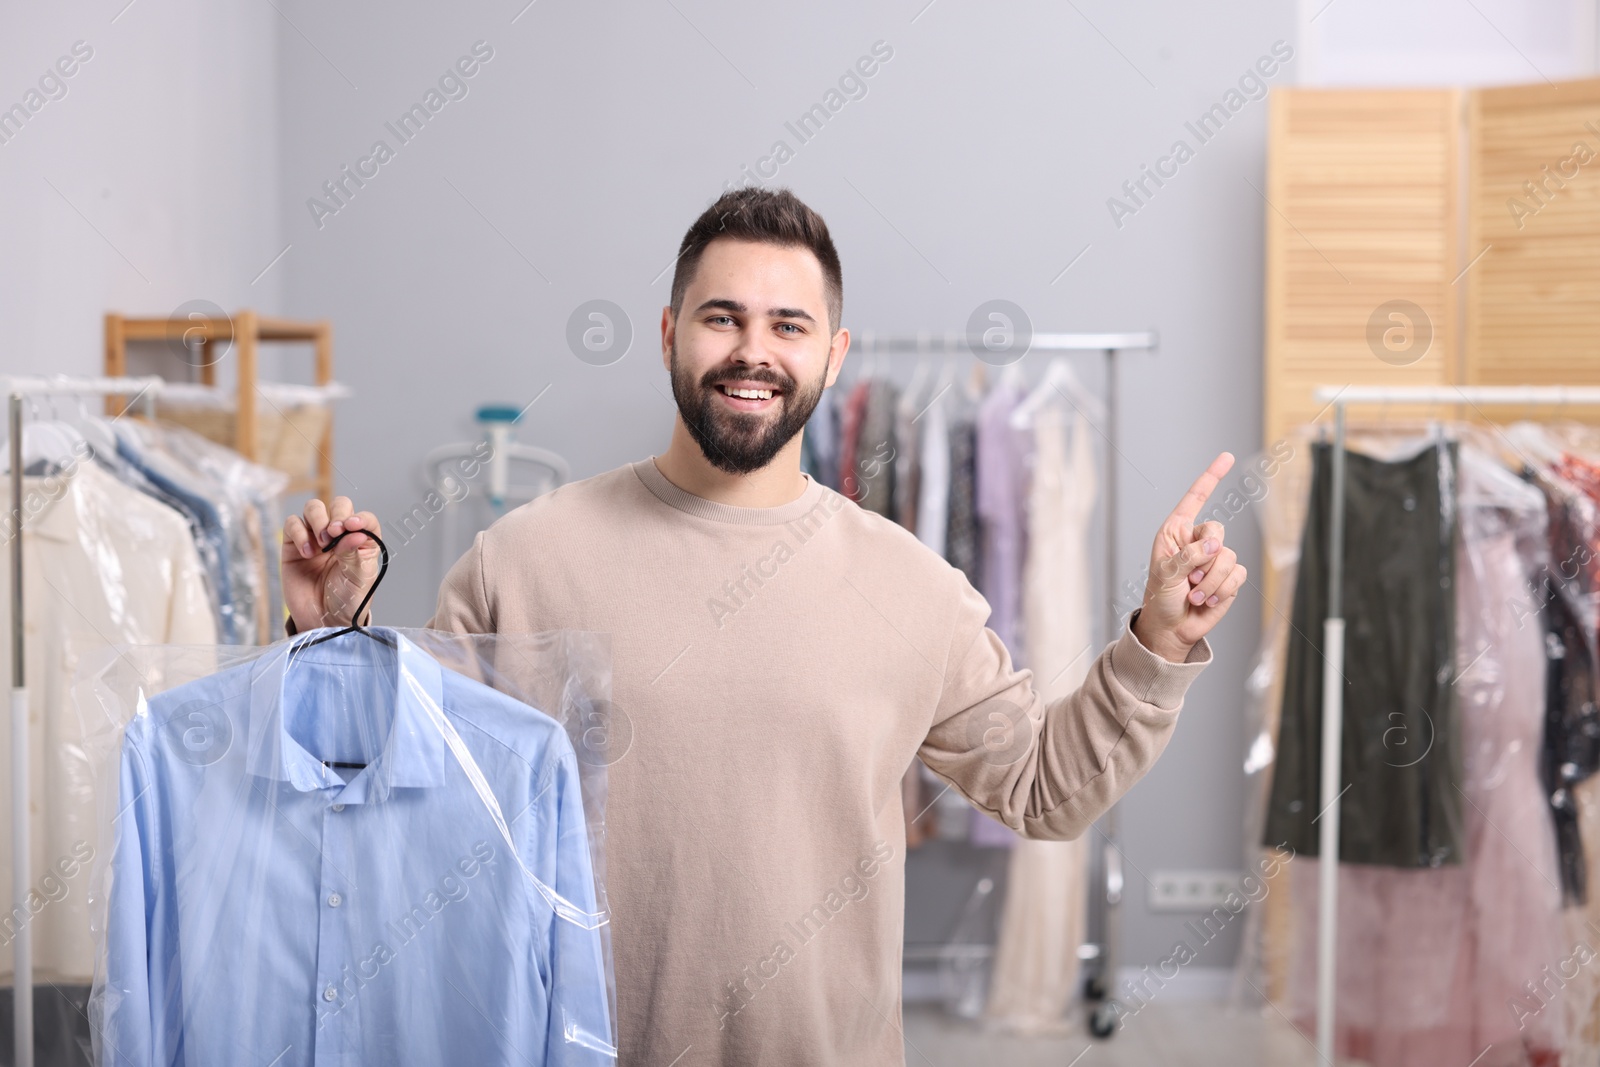 Photo of Dry-cleaning service. Happy man holding hanger with shirt in plastic bag and pointing at something indoors